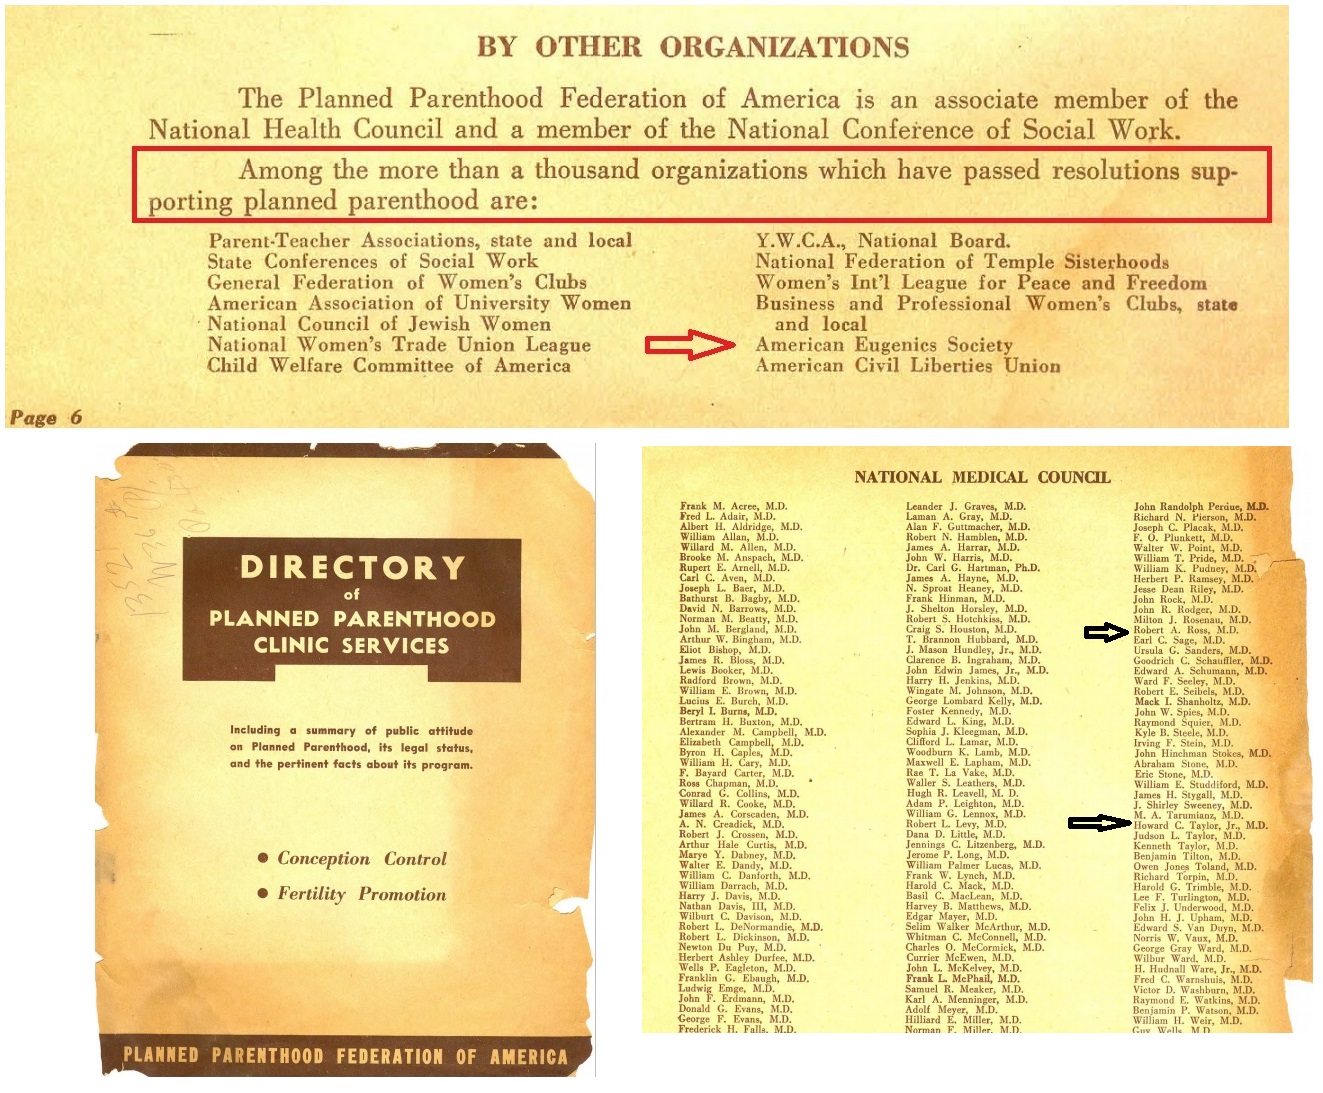 Image: Planned Parenthood 1945 brochure ACOG presidents on board supported by American Eugenics Society